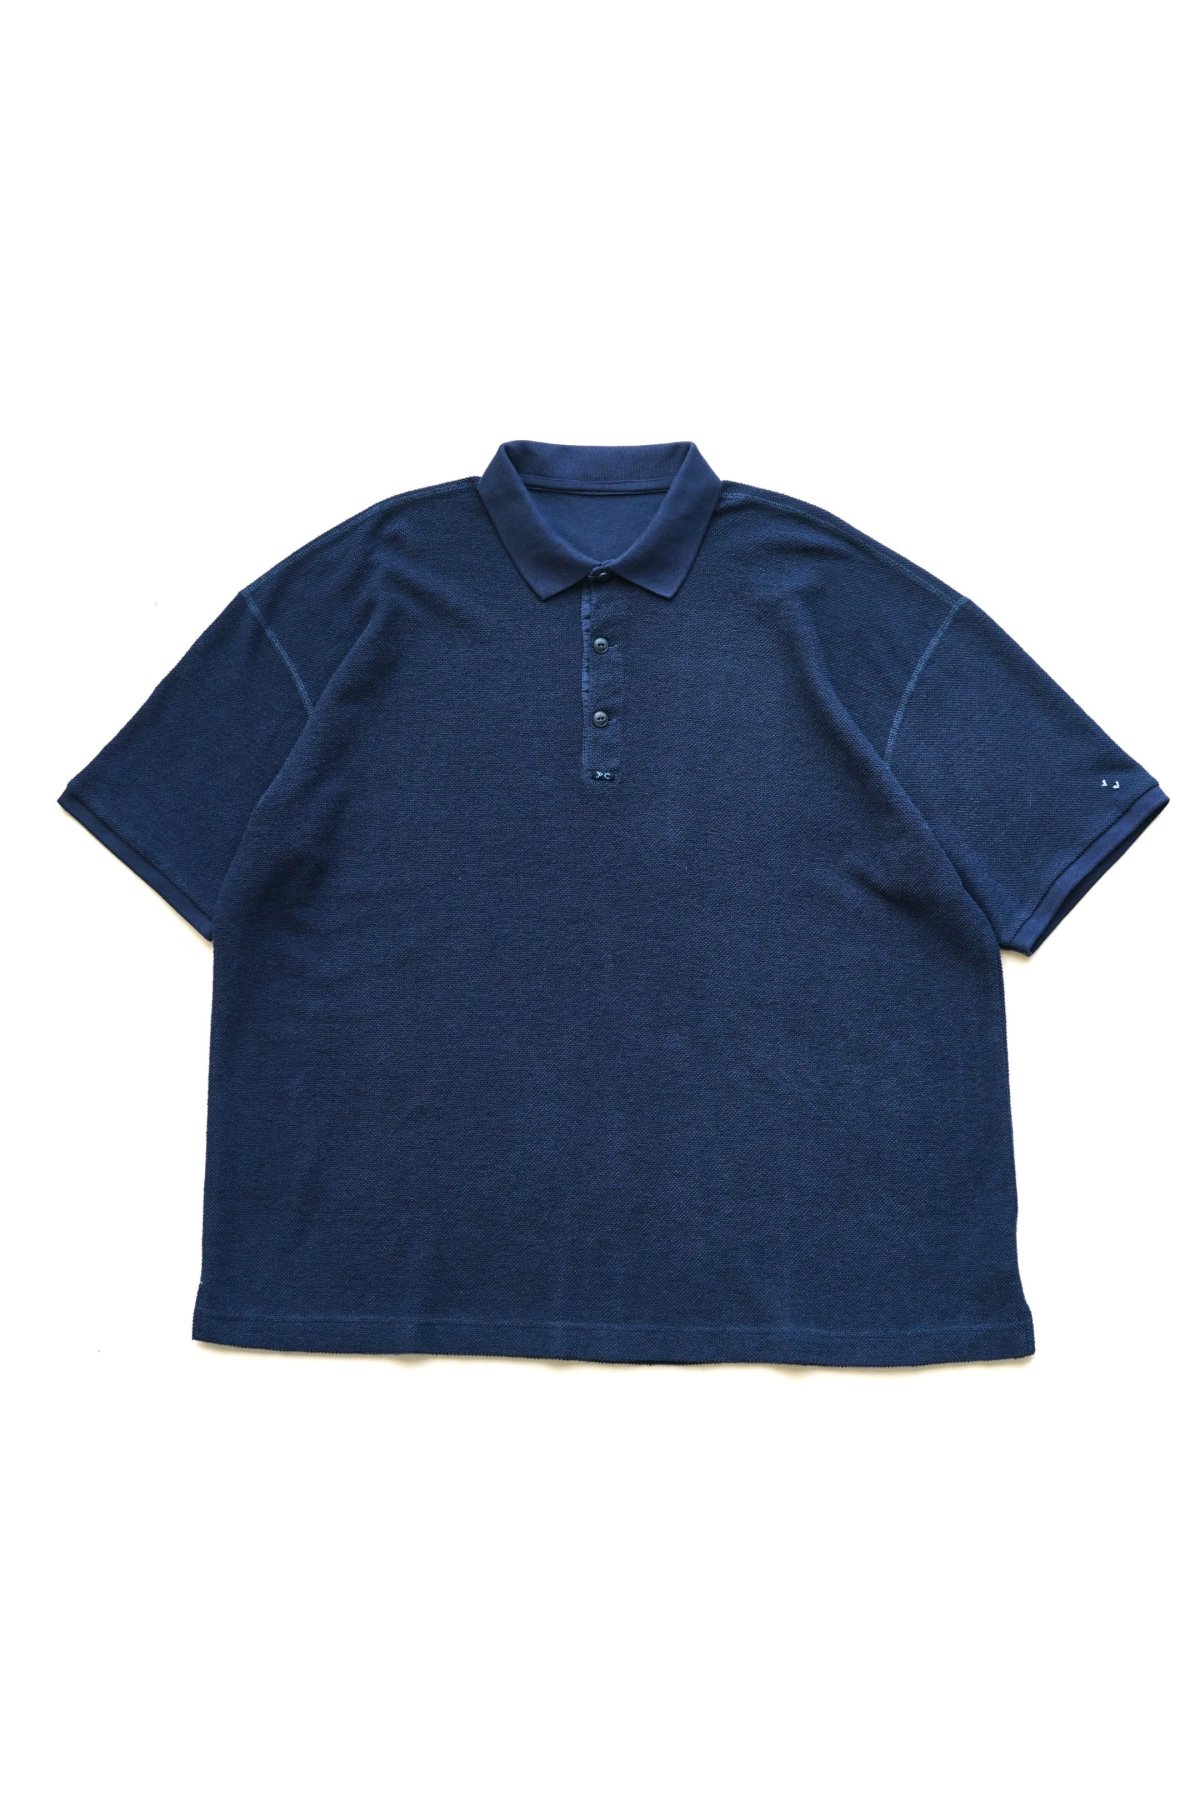 Porter Classic - SUMMER PILE POLO SHIRT - NAVY ポータークラシック 